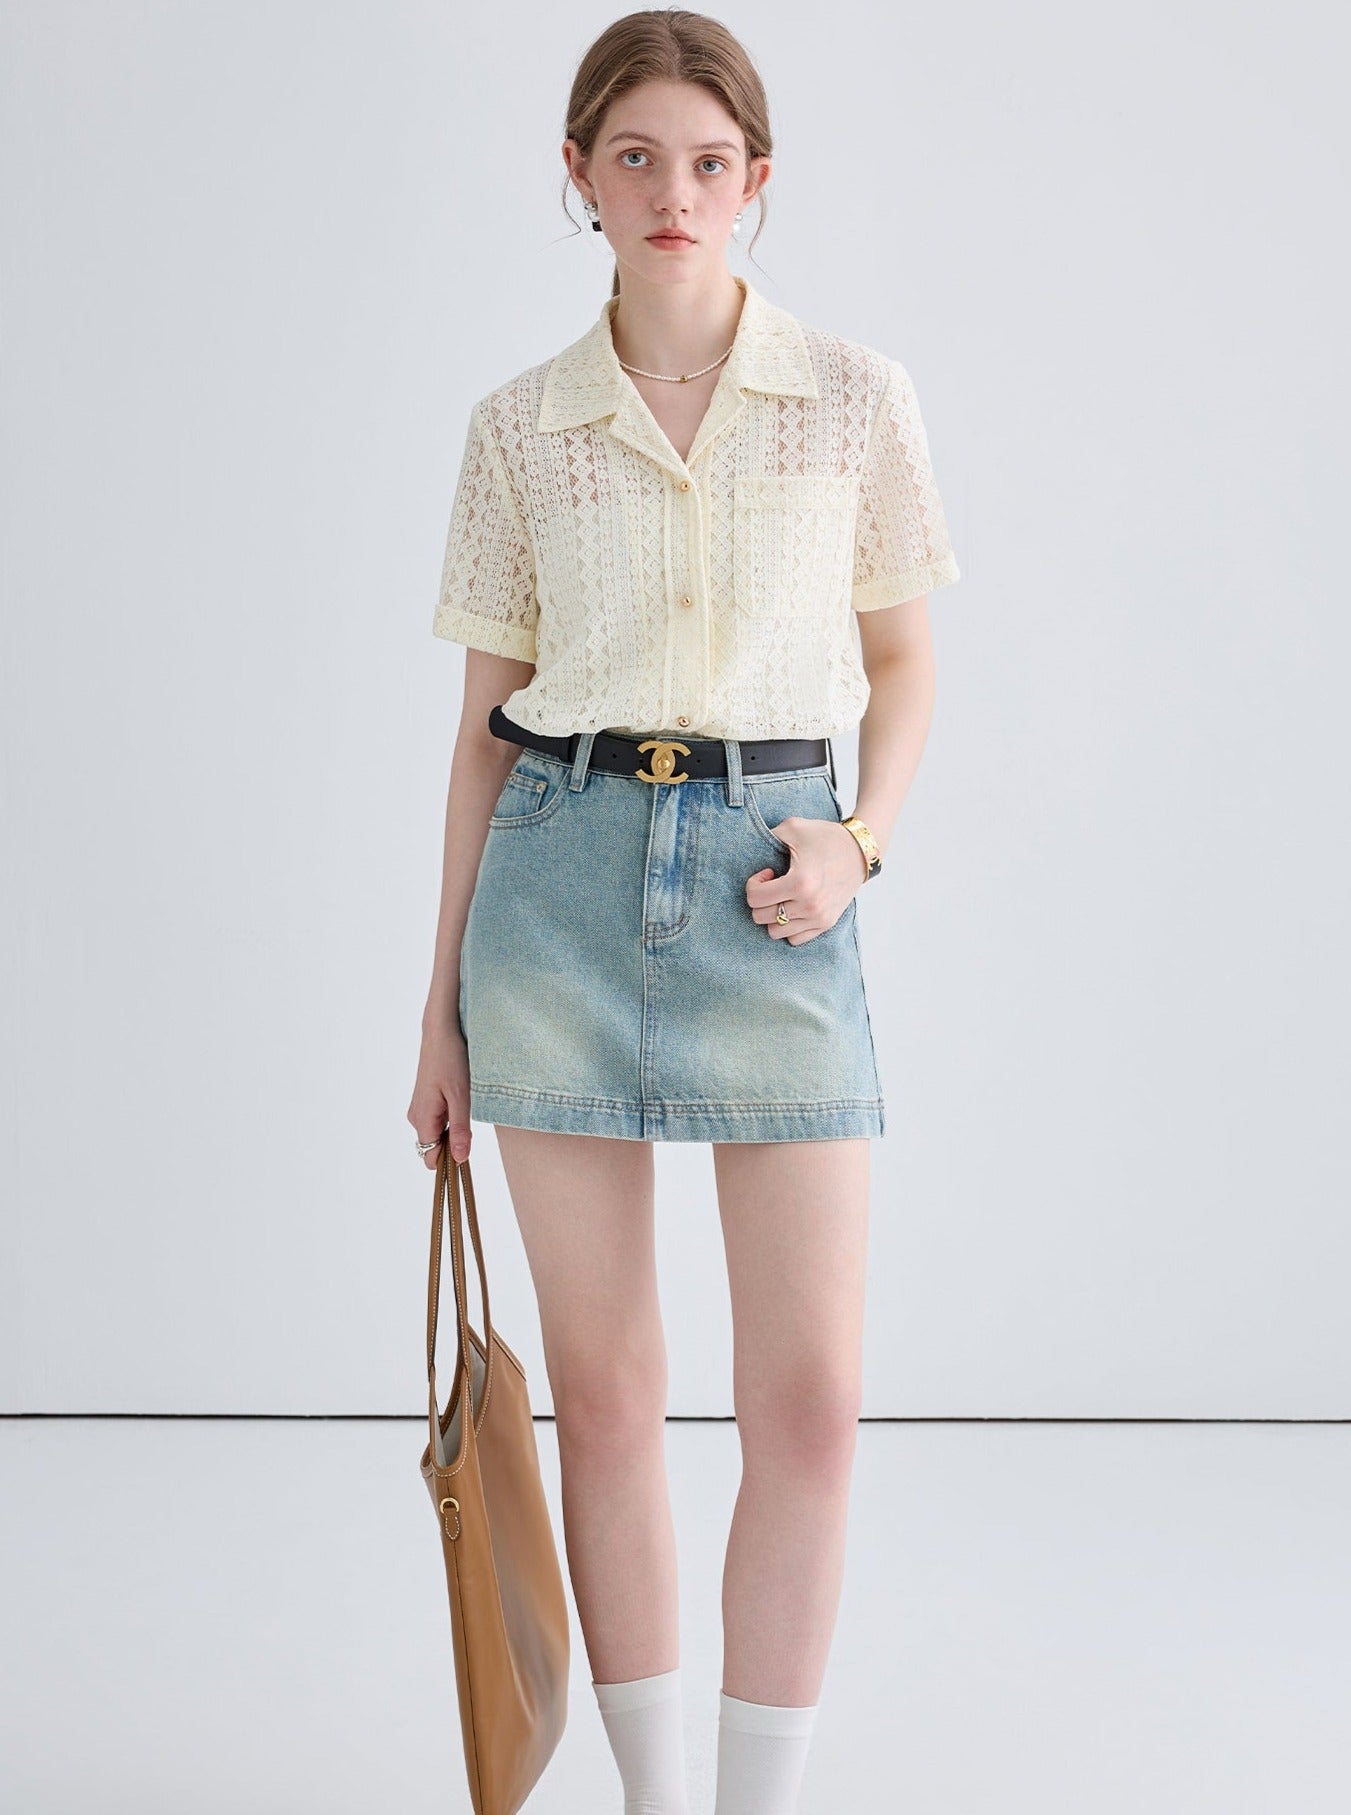 French V-Neck Casual Shirt And Skirt Set-Up